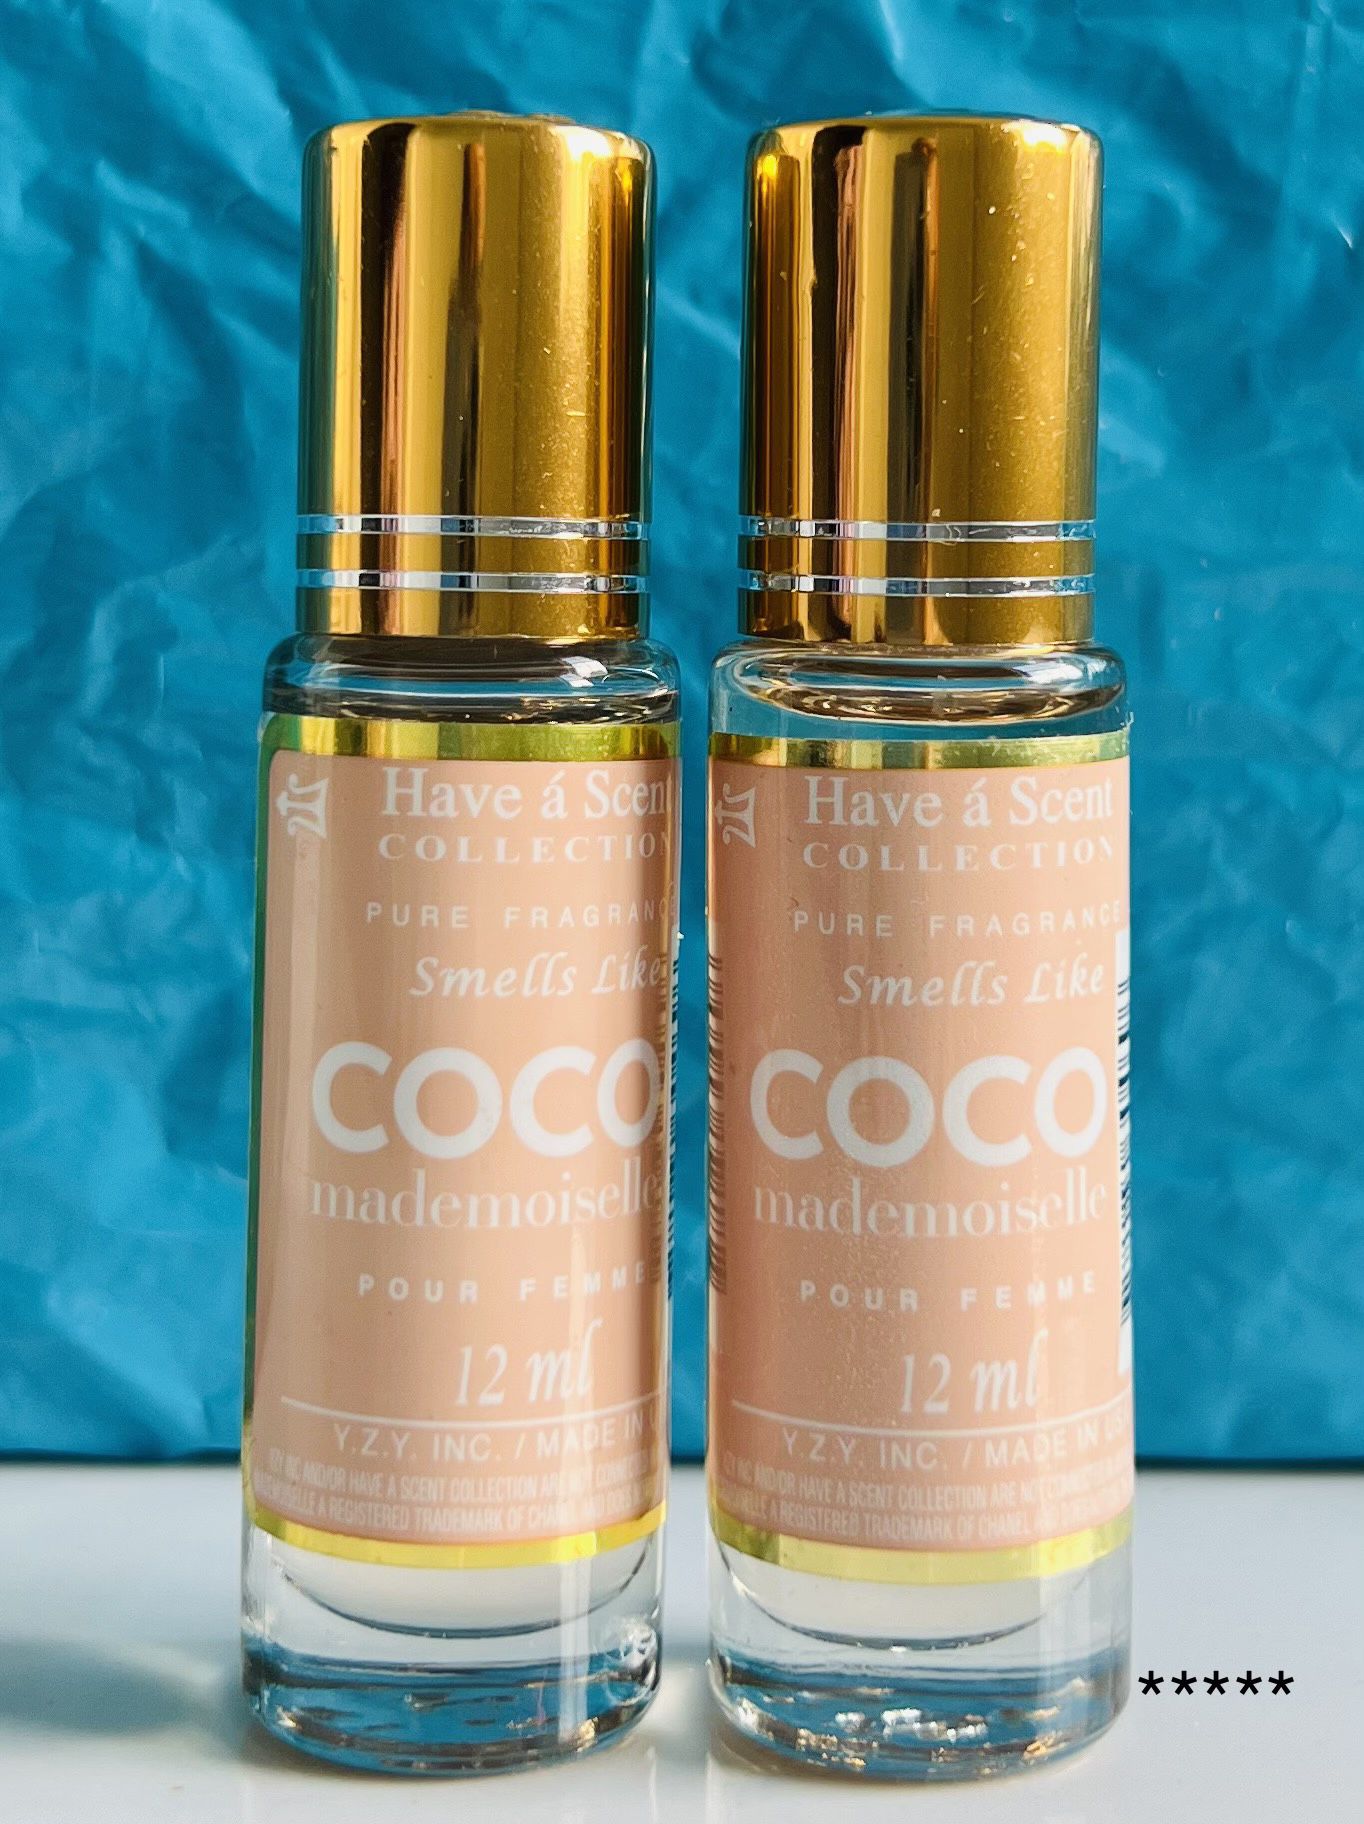 Coco Mademoiselle Roll on oil Travel Size Lot of 2 for Sale in Norcross, GA  - OfferUp